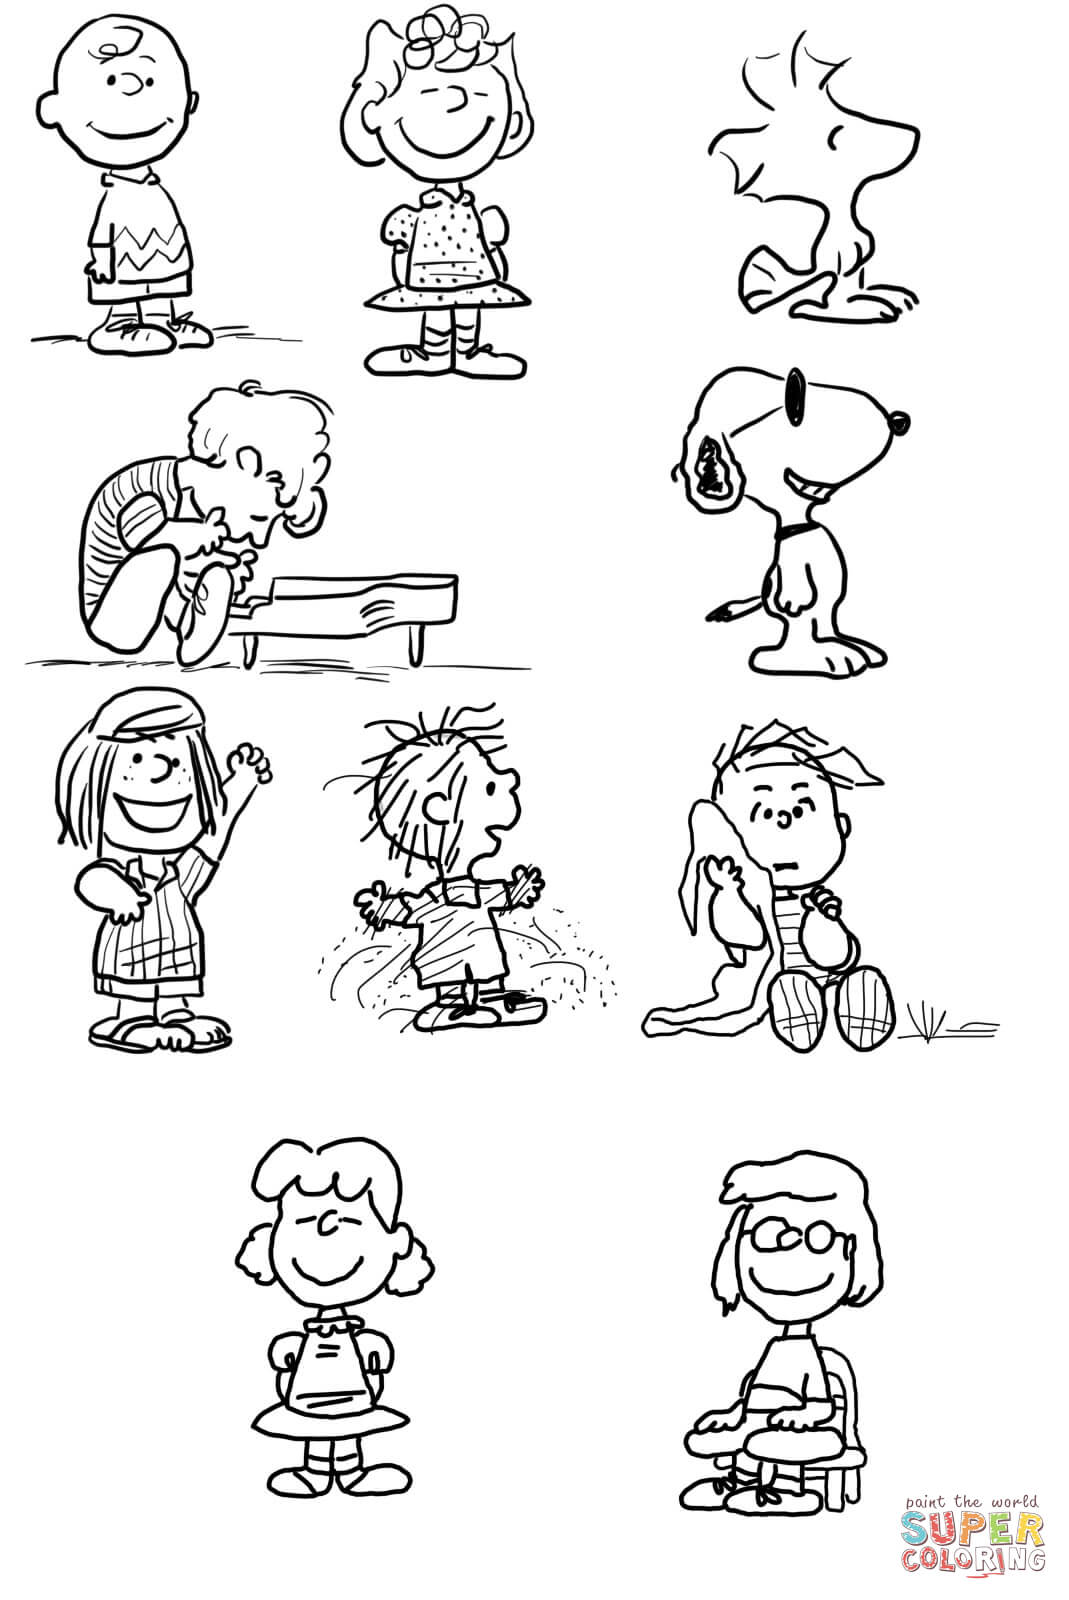 Charlie brown characters coloring page free printable coloring pages